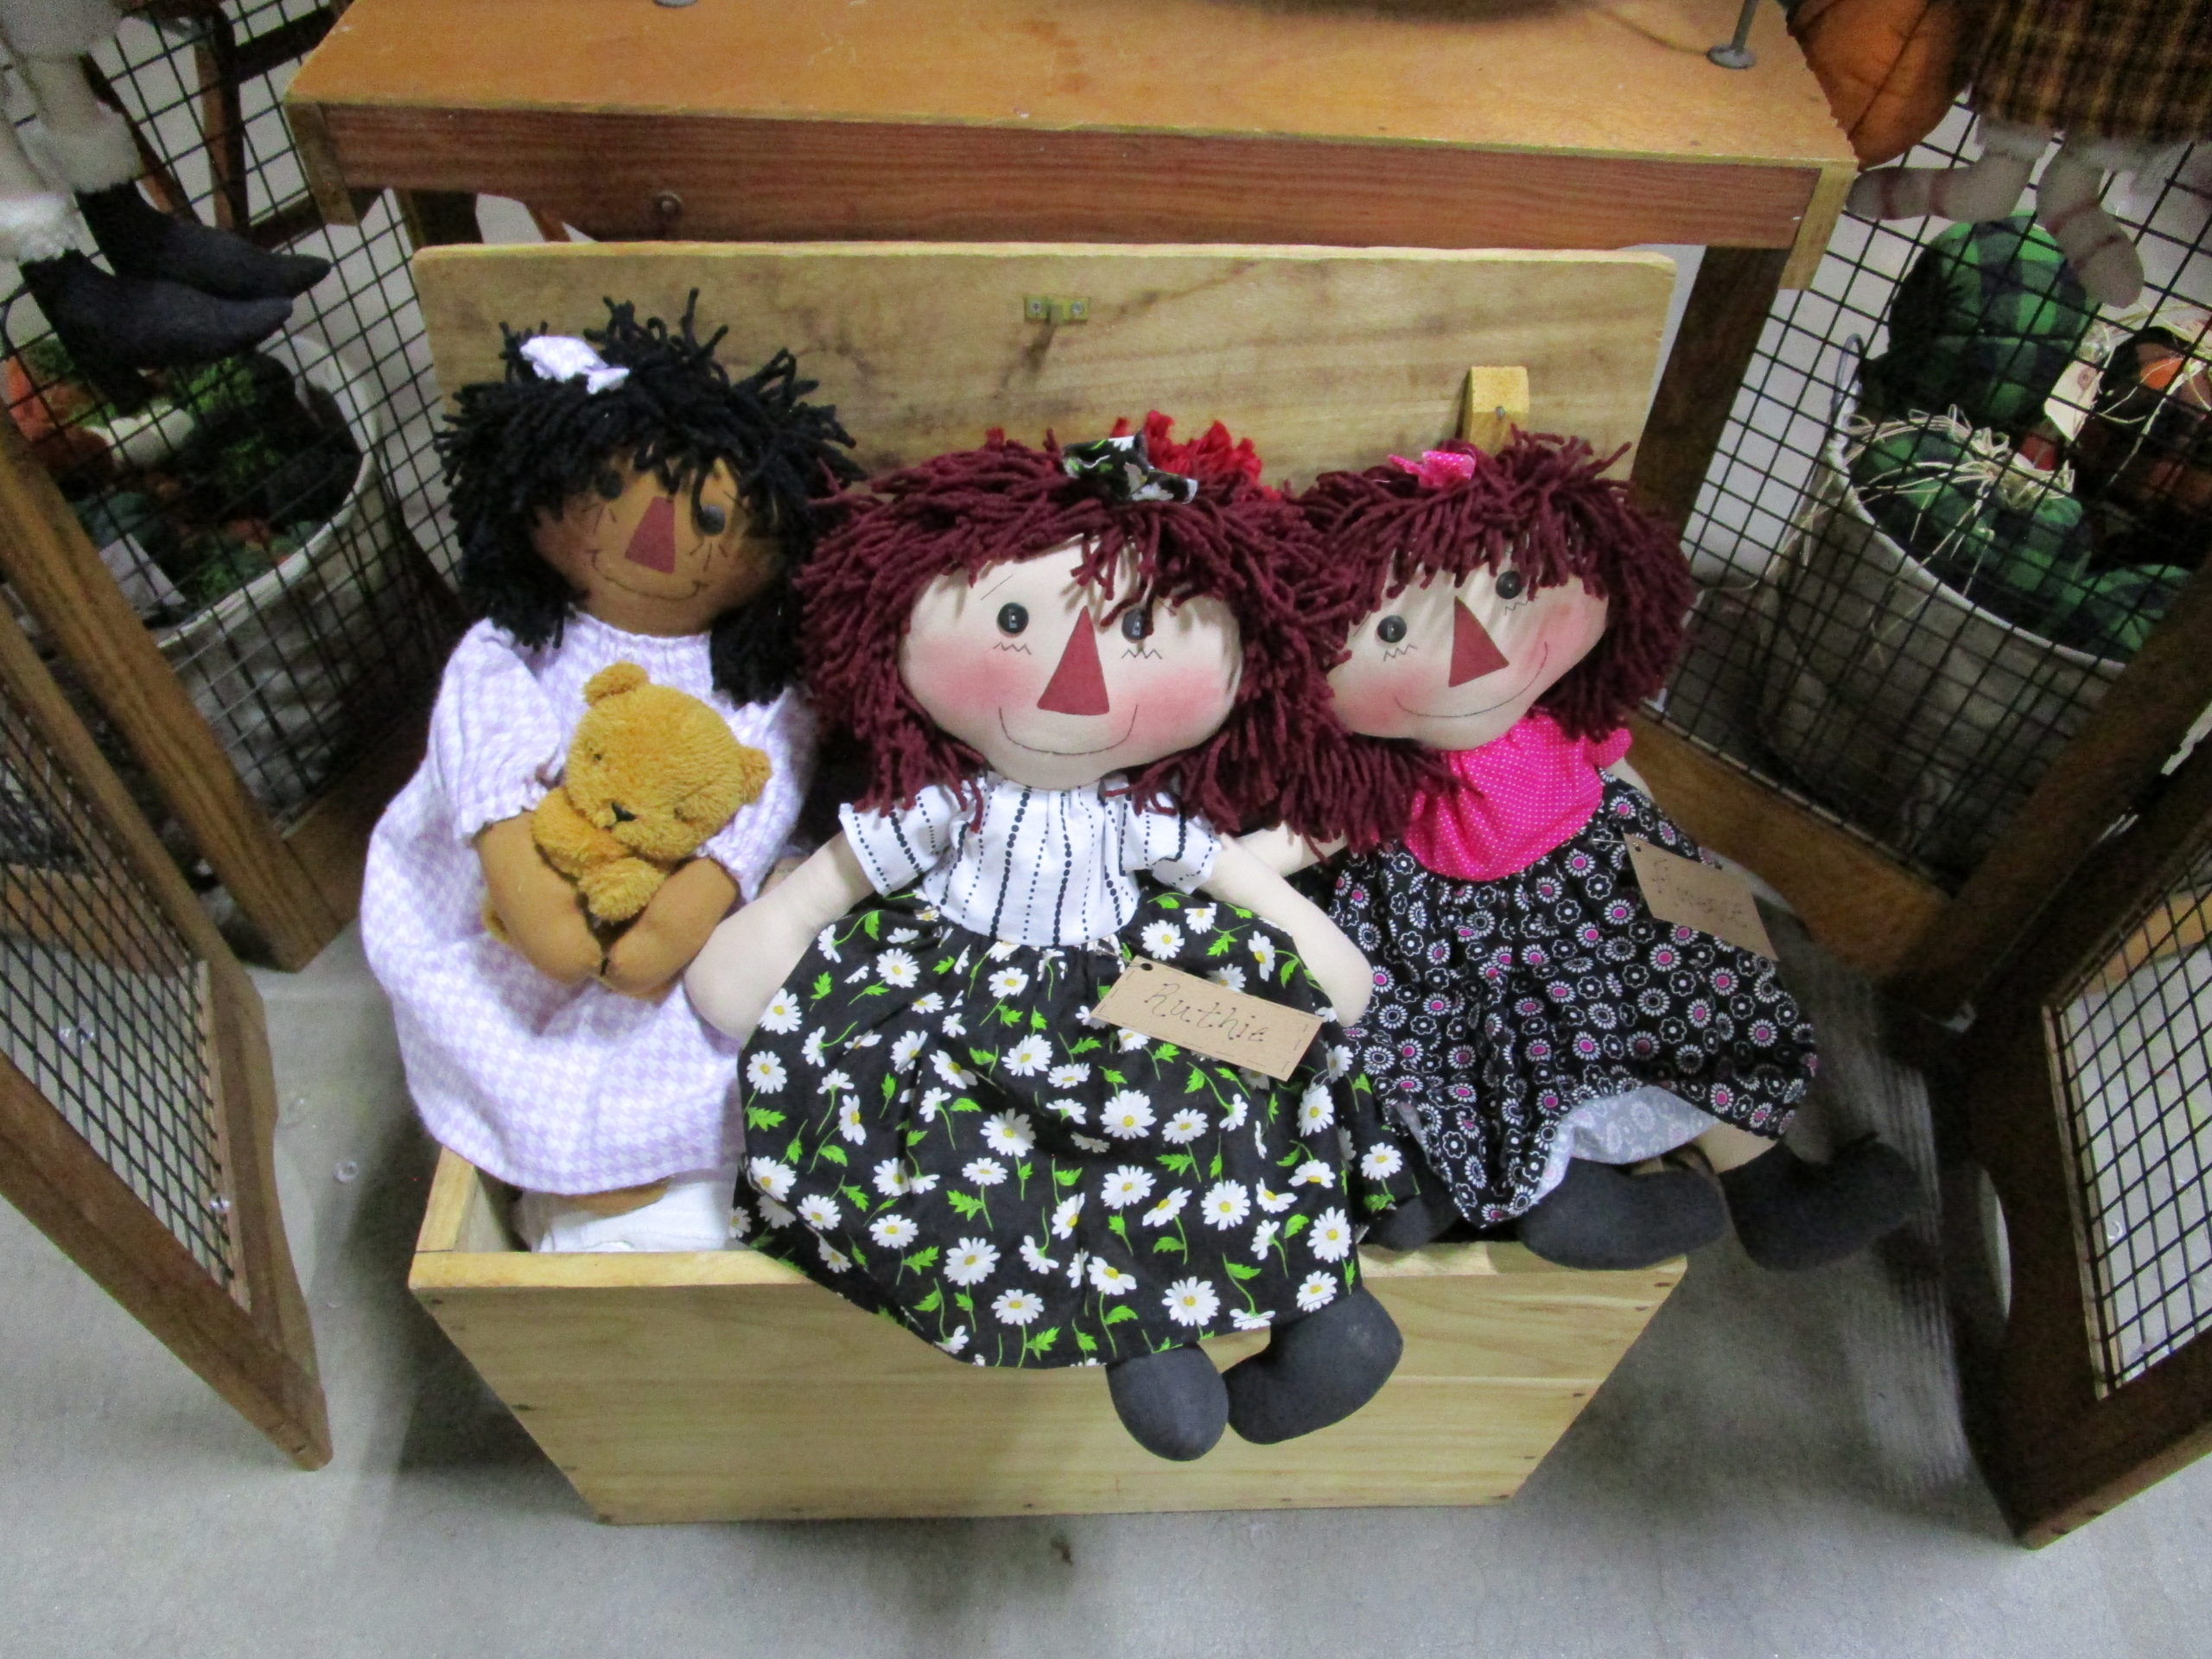 Handcrafted dolls at the Old Deerfield Crafts fair.